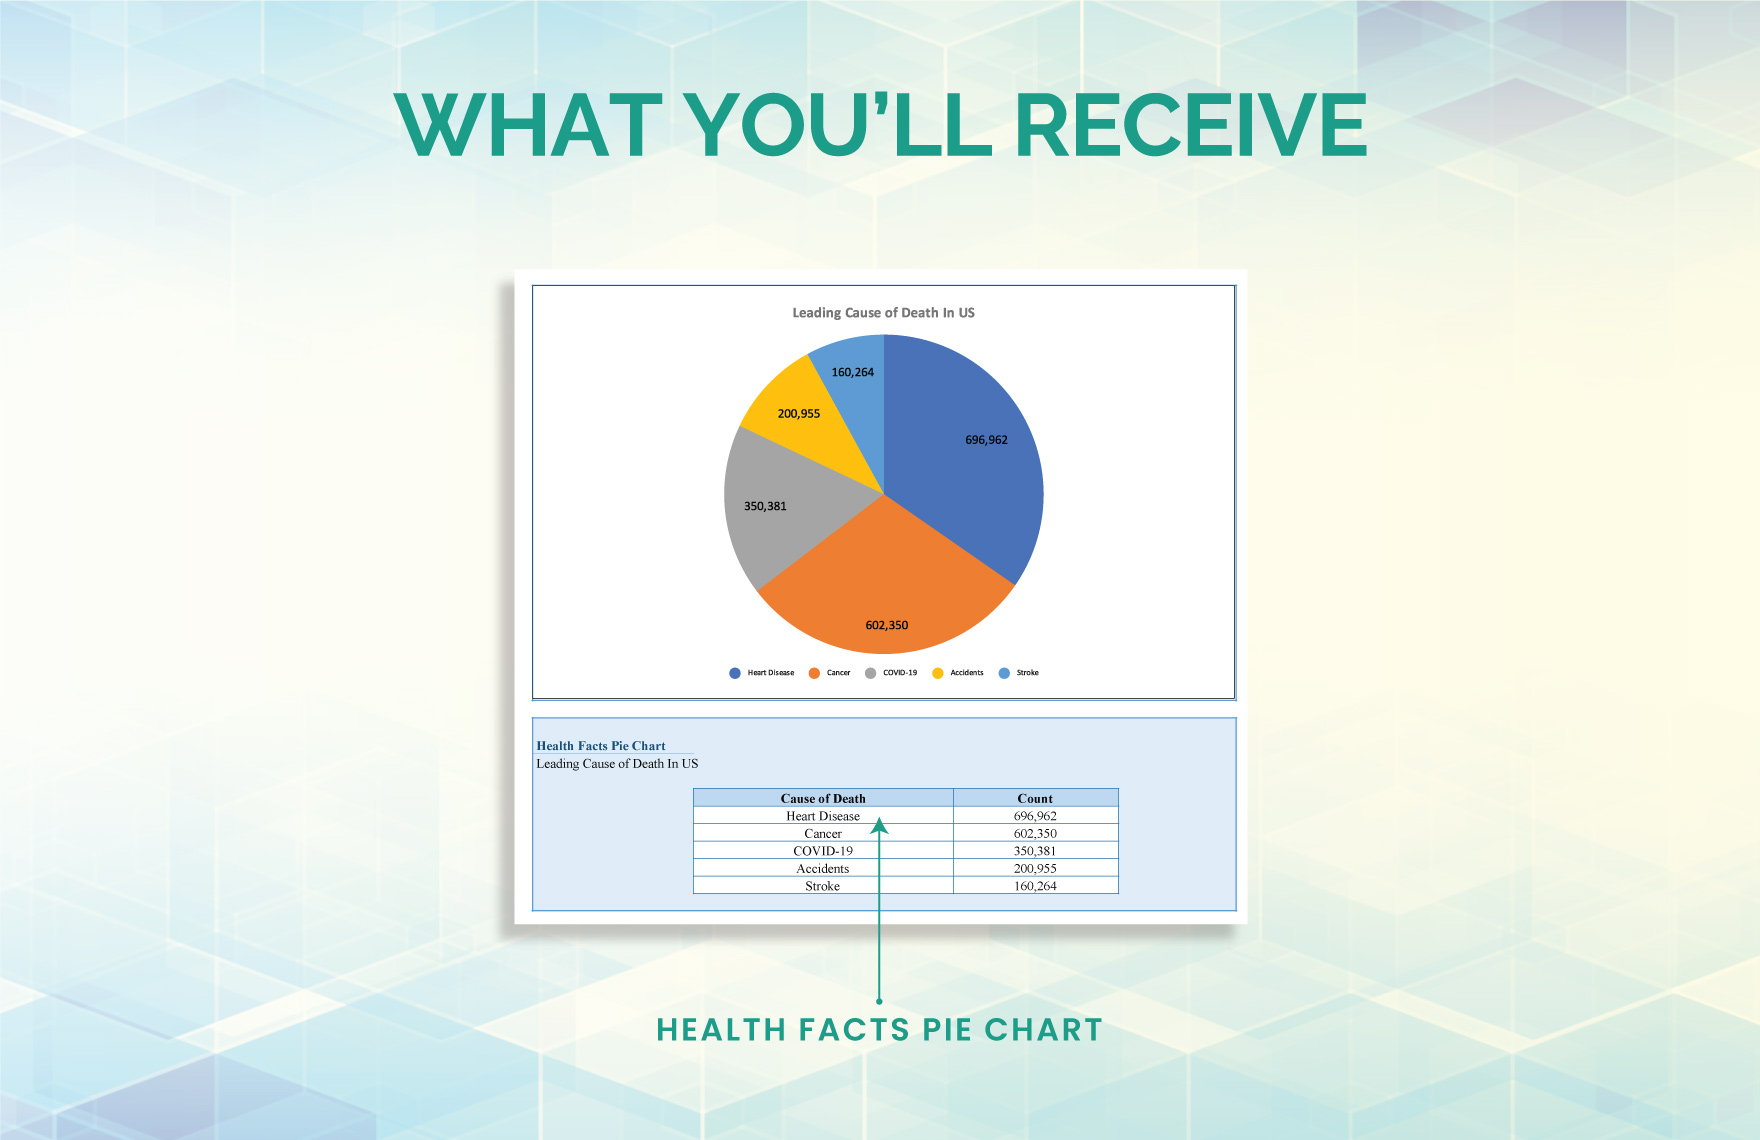 Health Facts Pie Chart